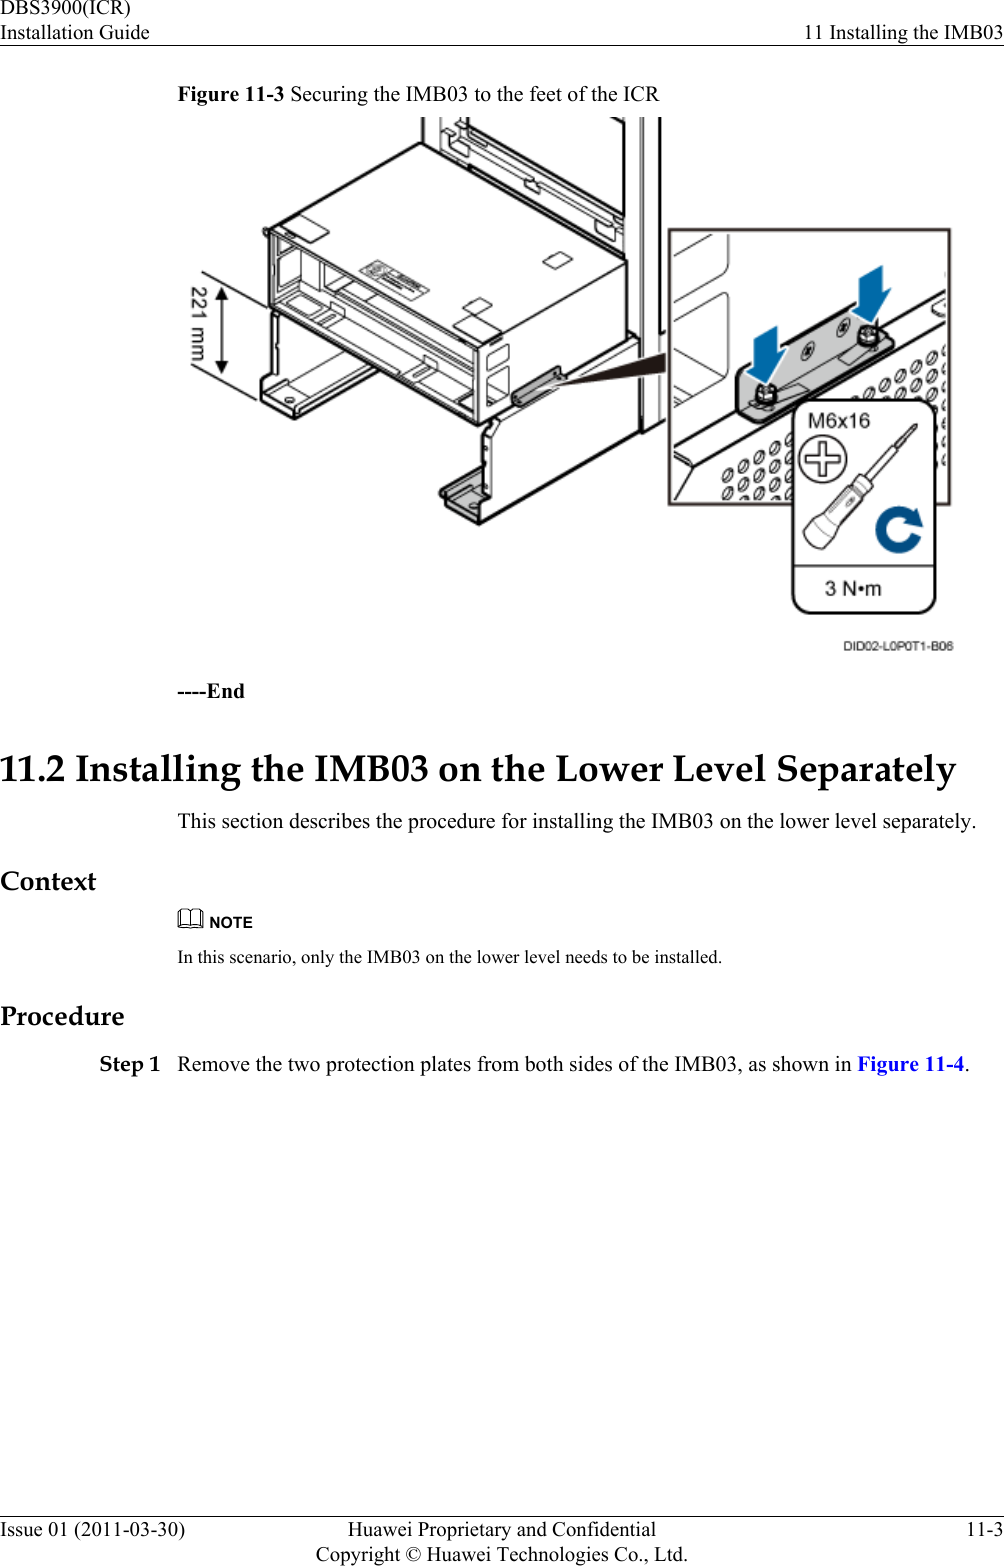 Figure 11-3 Securing the IMB03 to the feet of the ICR----End11.2 Installing the IMB03 on the Lower Level SeparatelyThis section describes the procedure for installing the IMB03 on the lower level separately.ContextNOTEIn this scenario, only the IMB03 on the lower level needs to be installed.ProcedureStep 1 Remove the two protection plates from both sides of the IMB03, as shown in Figure 11-4.DBS3900(ICR)Installation Guide 11 Installing the IMB03Issue 01 (2011-03-30) Huawei Proprietary and ConfidentialCopyright © Huawei Technologies Co., Ltd.11-3